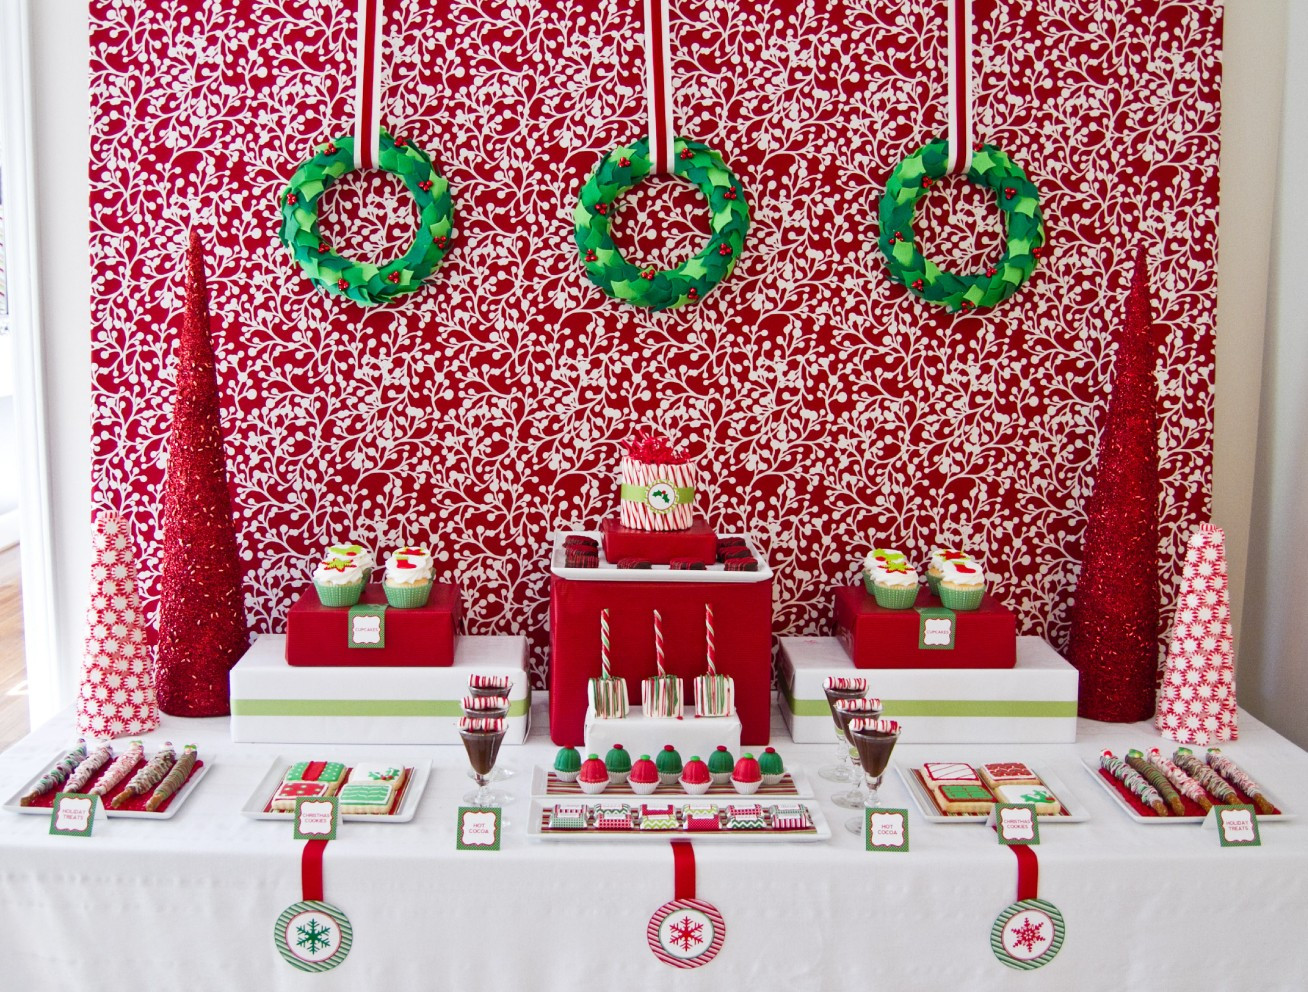 Holiday Party Decoration Ideas
 MON TRESOR Christmas Tables & Inspirations